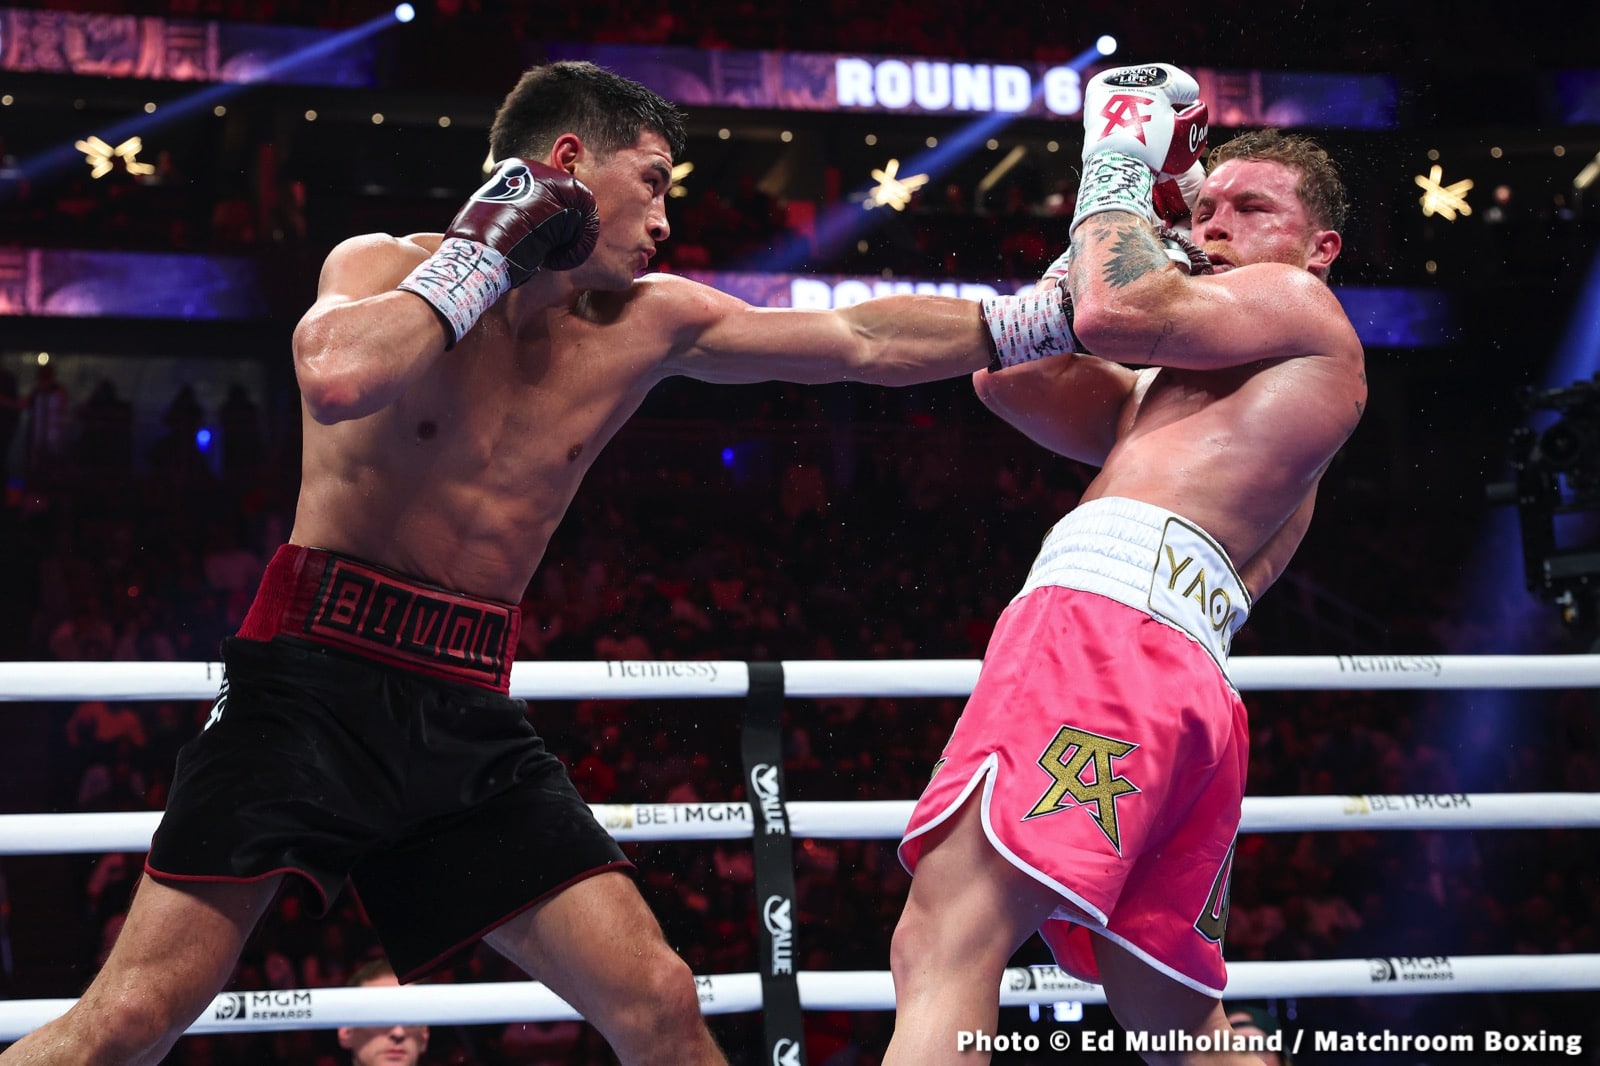 Image: Canelo loss to Bivol makes him "non-list worthy" for P4P says Derrick James